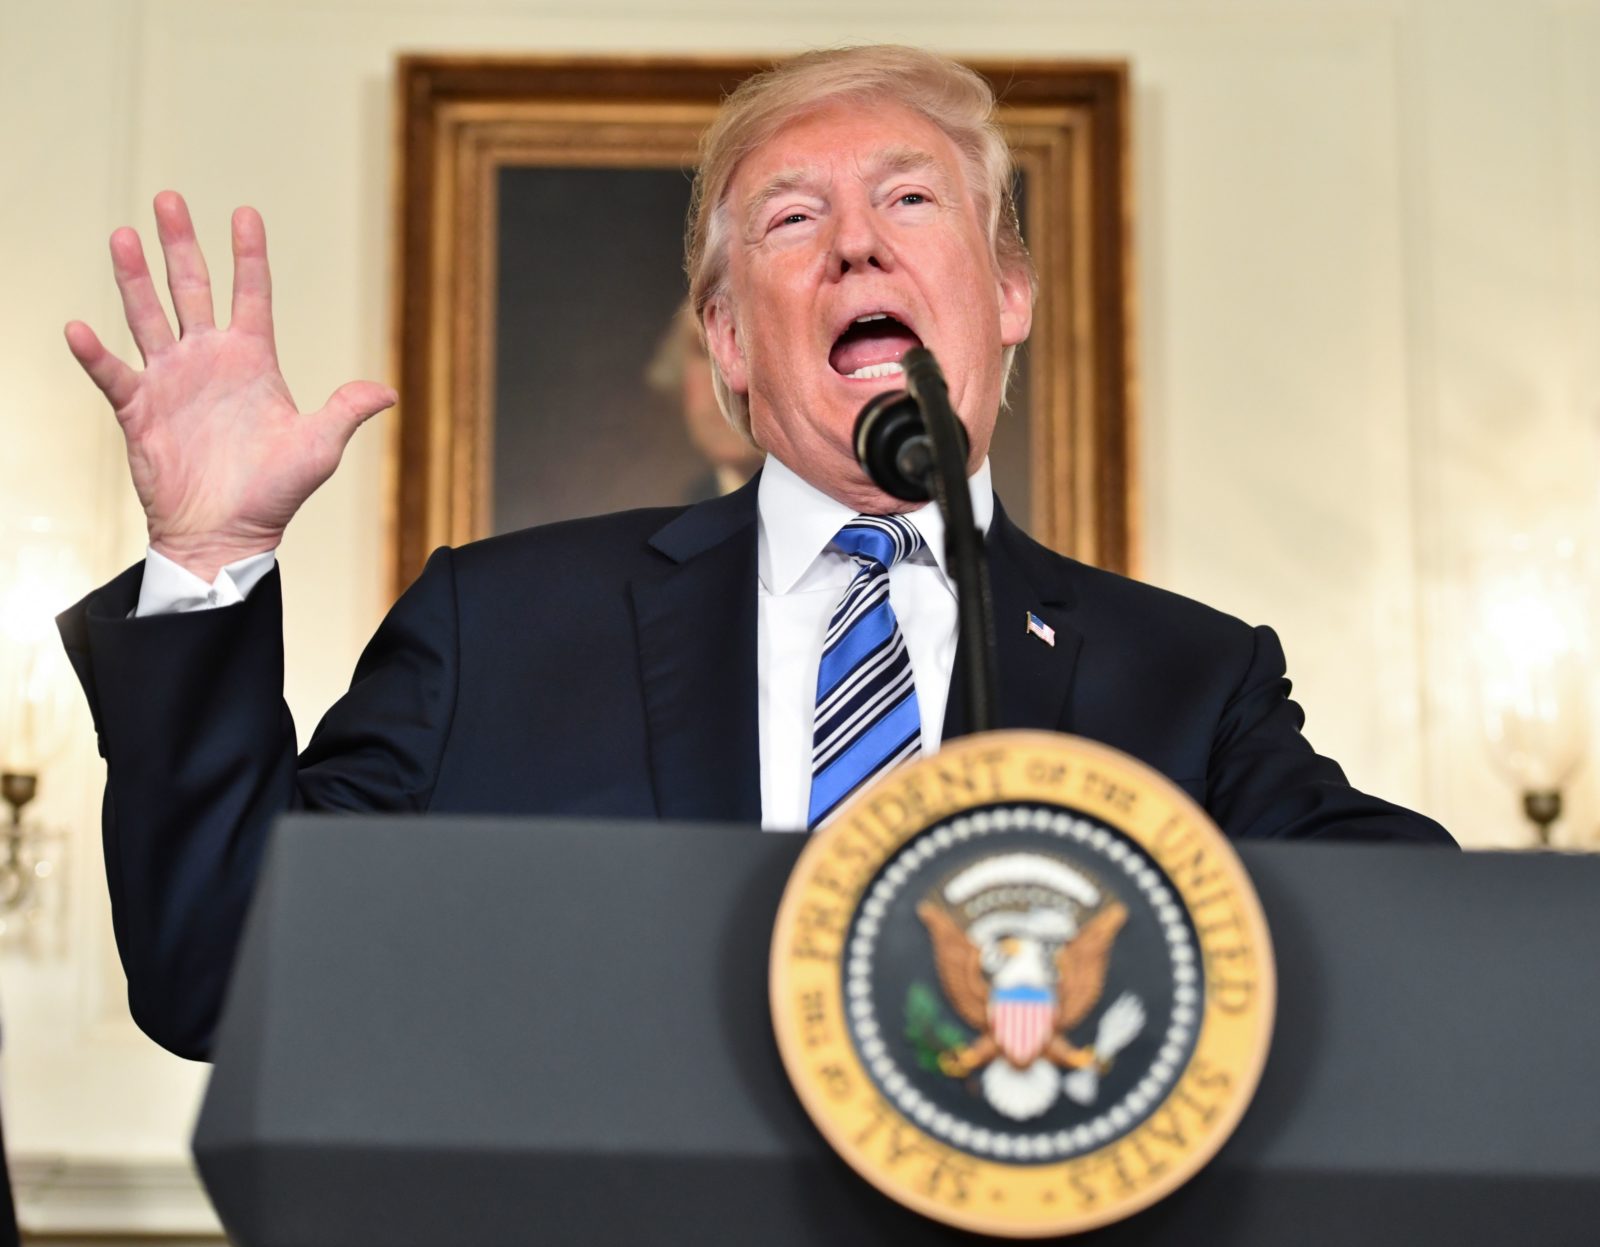 TOPSHOT - US President Donald Trump speaks about the spending bill during a press conference in the Diplomatic Reception Room at the White House on March 23, 2018. / AFP PHOTO / Nicholas Kamm (Photo credit should read NICHOLAS KAMM/AFP/Getty Images)